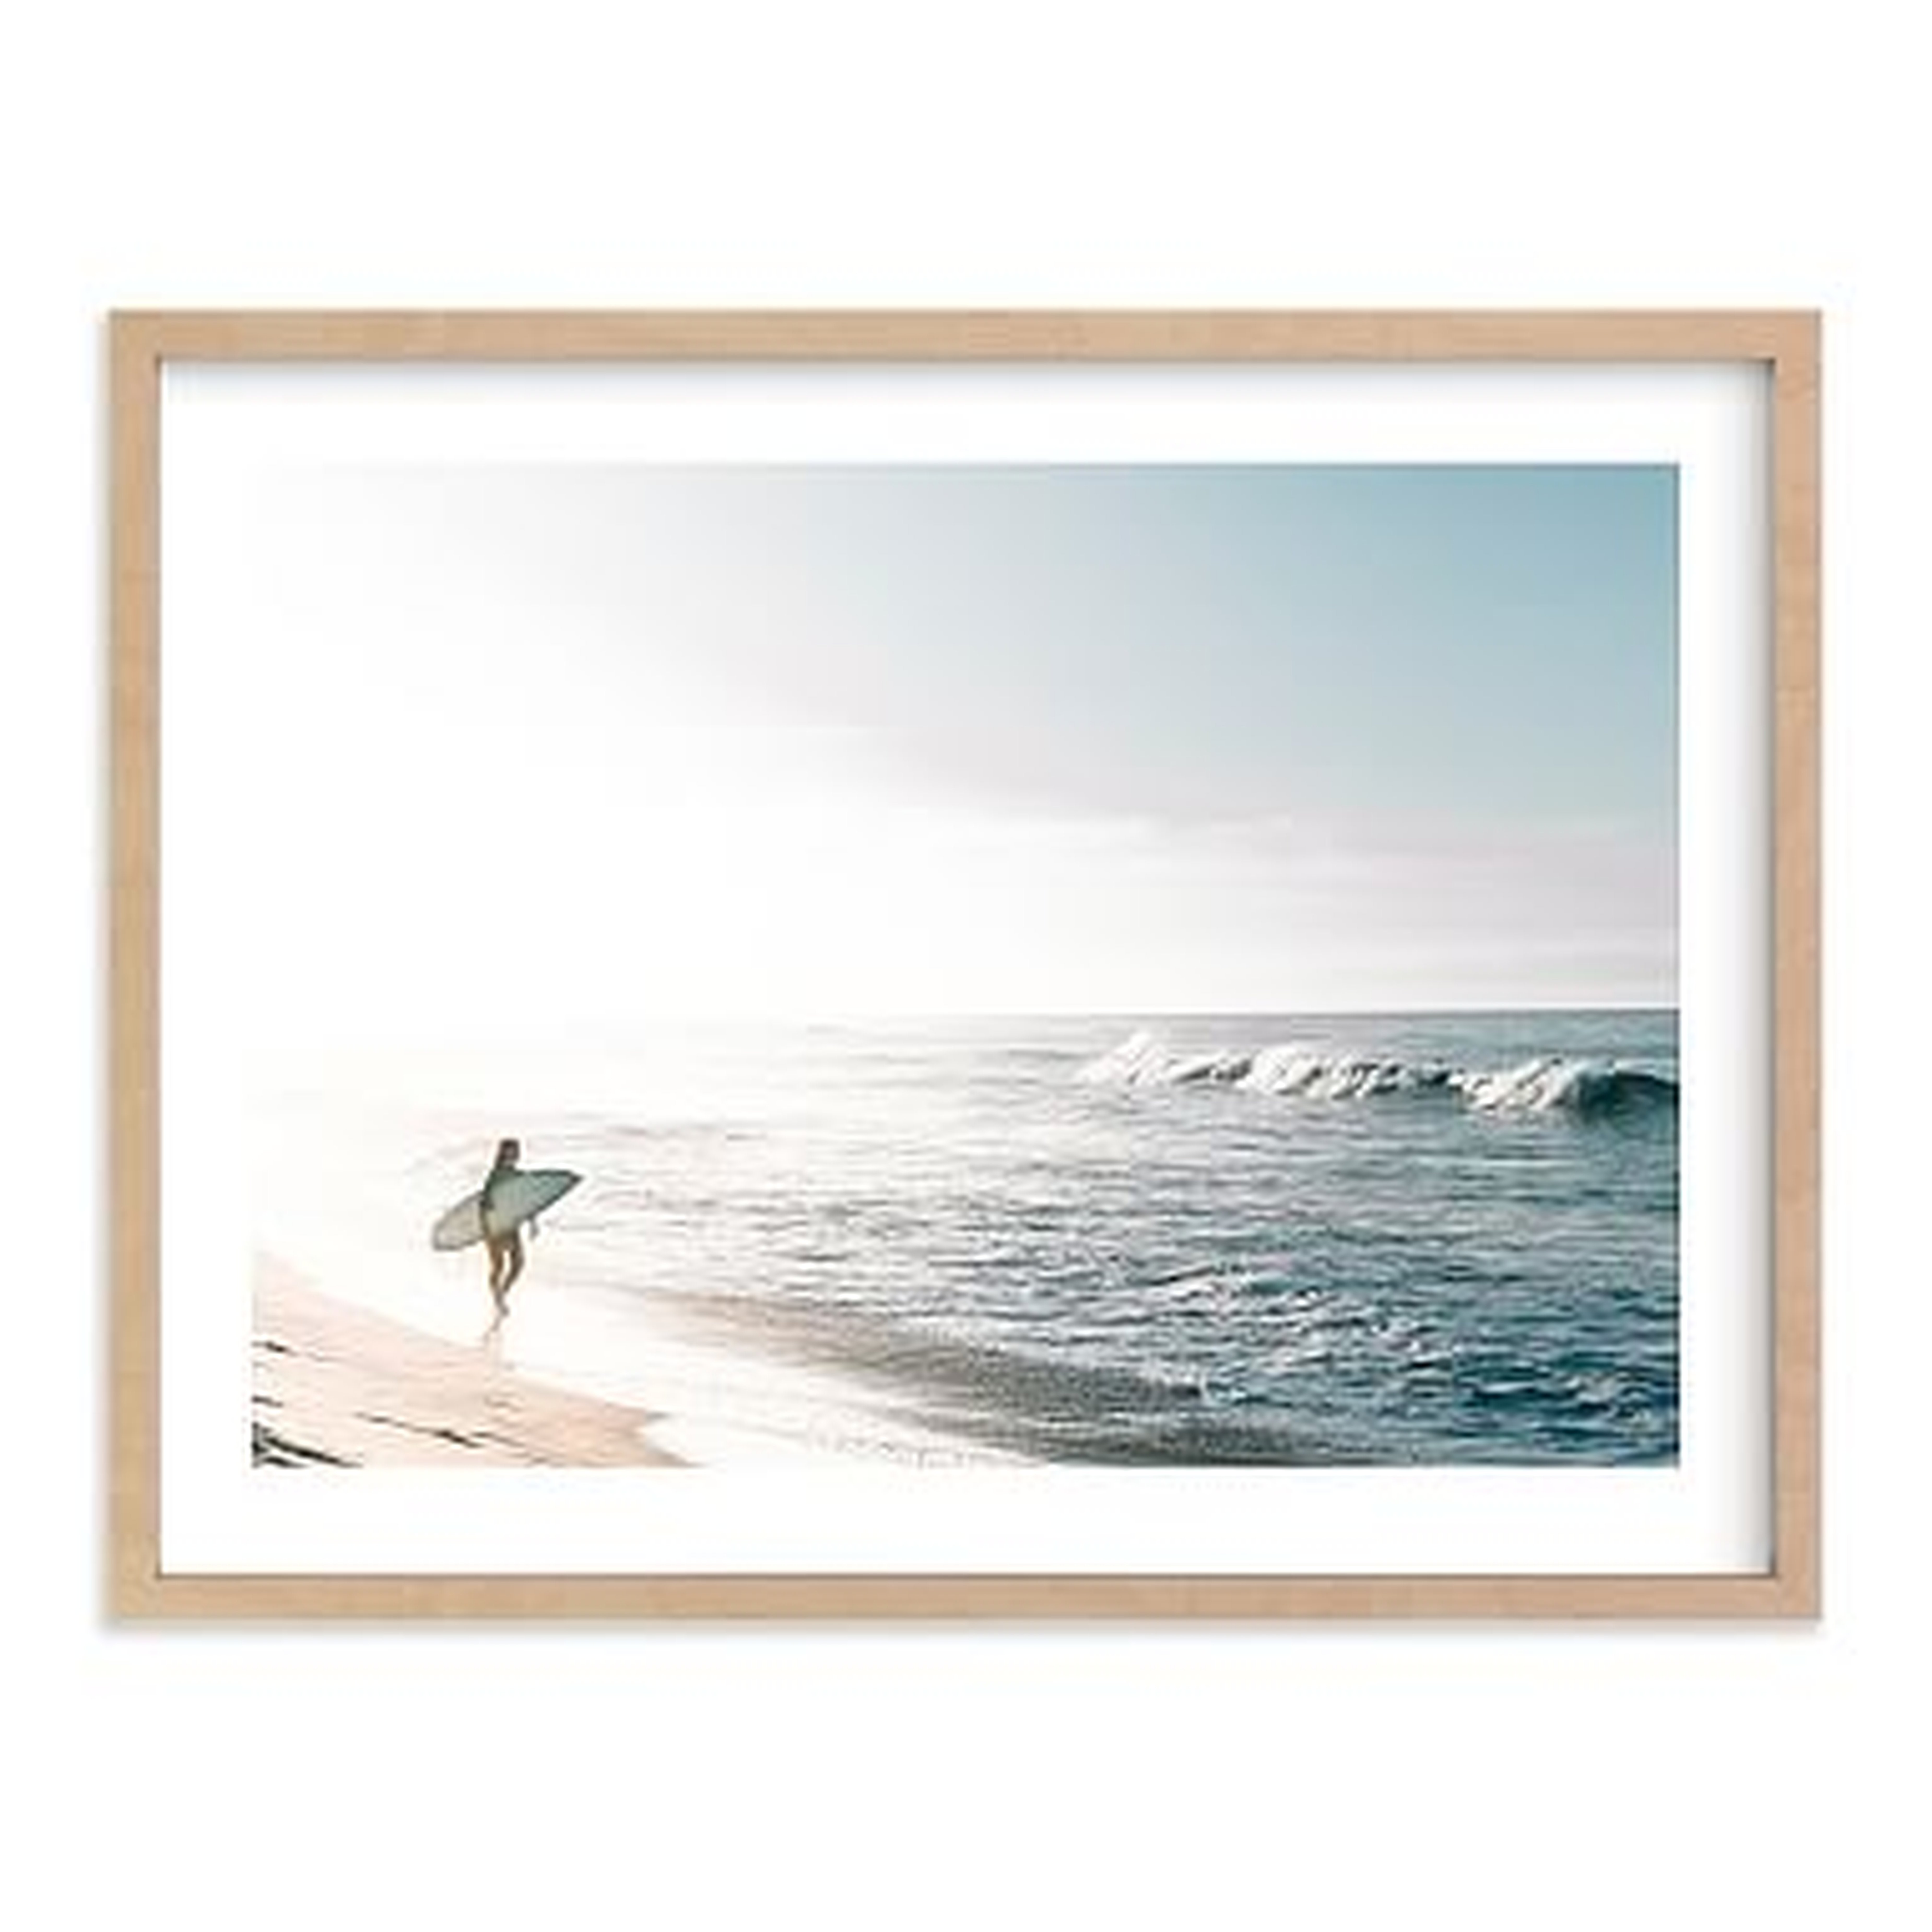 Surfer Girl Wall Art by Minted(R), 18"x24", Natural - Pottery Barn Teen